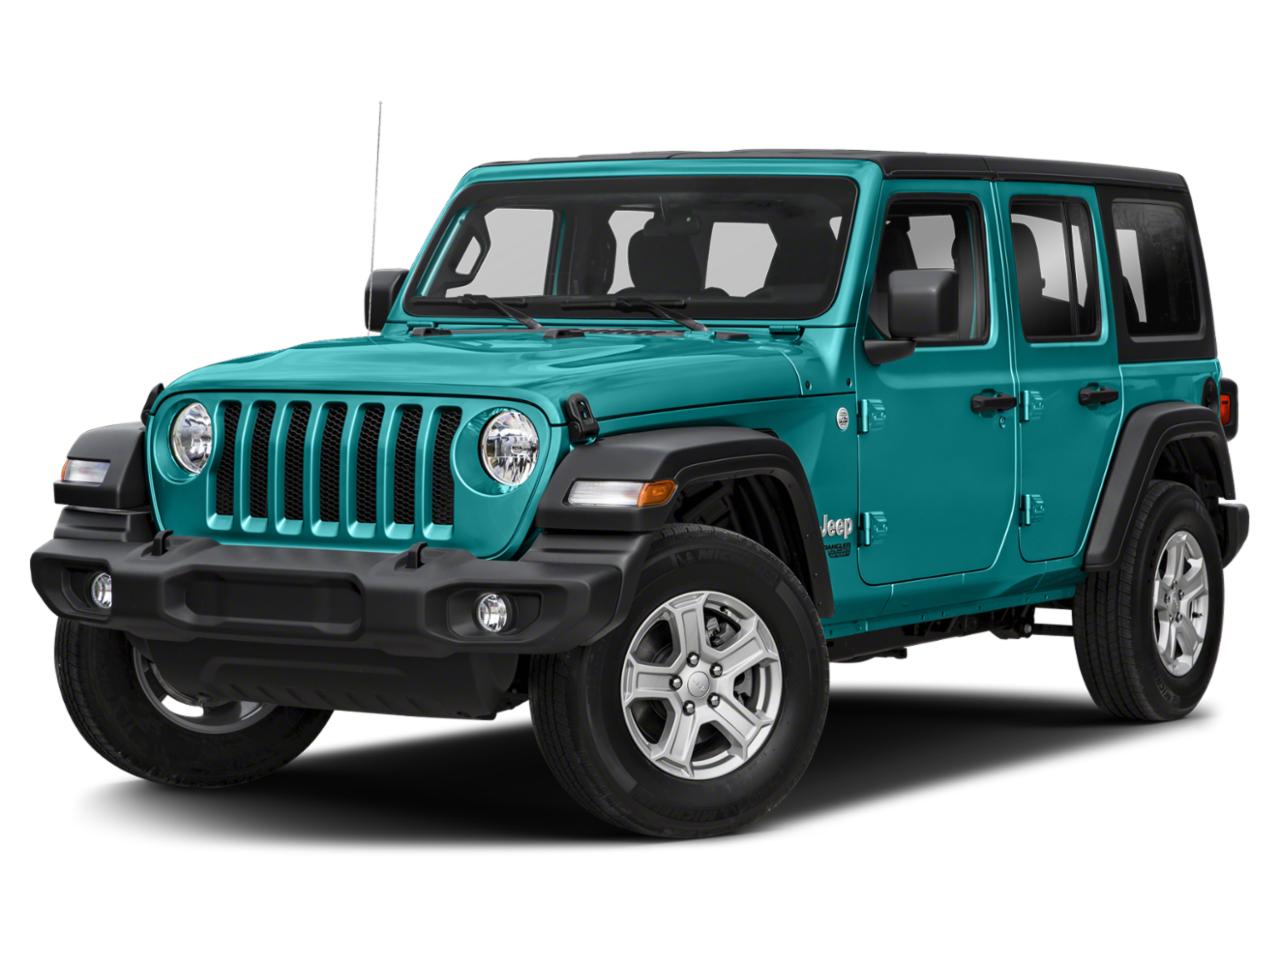 Used, Certified, Loaner Jeep Wrangler Unlimited Vehicles for Sale -  Riverhead Hyundai